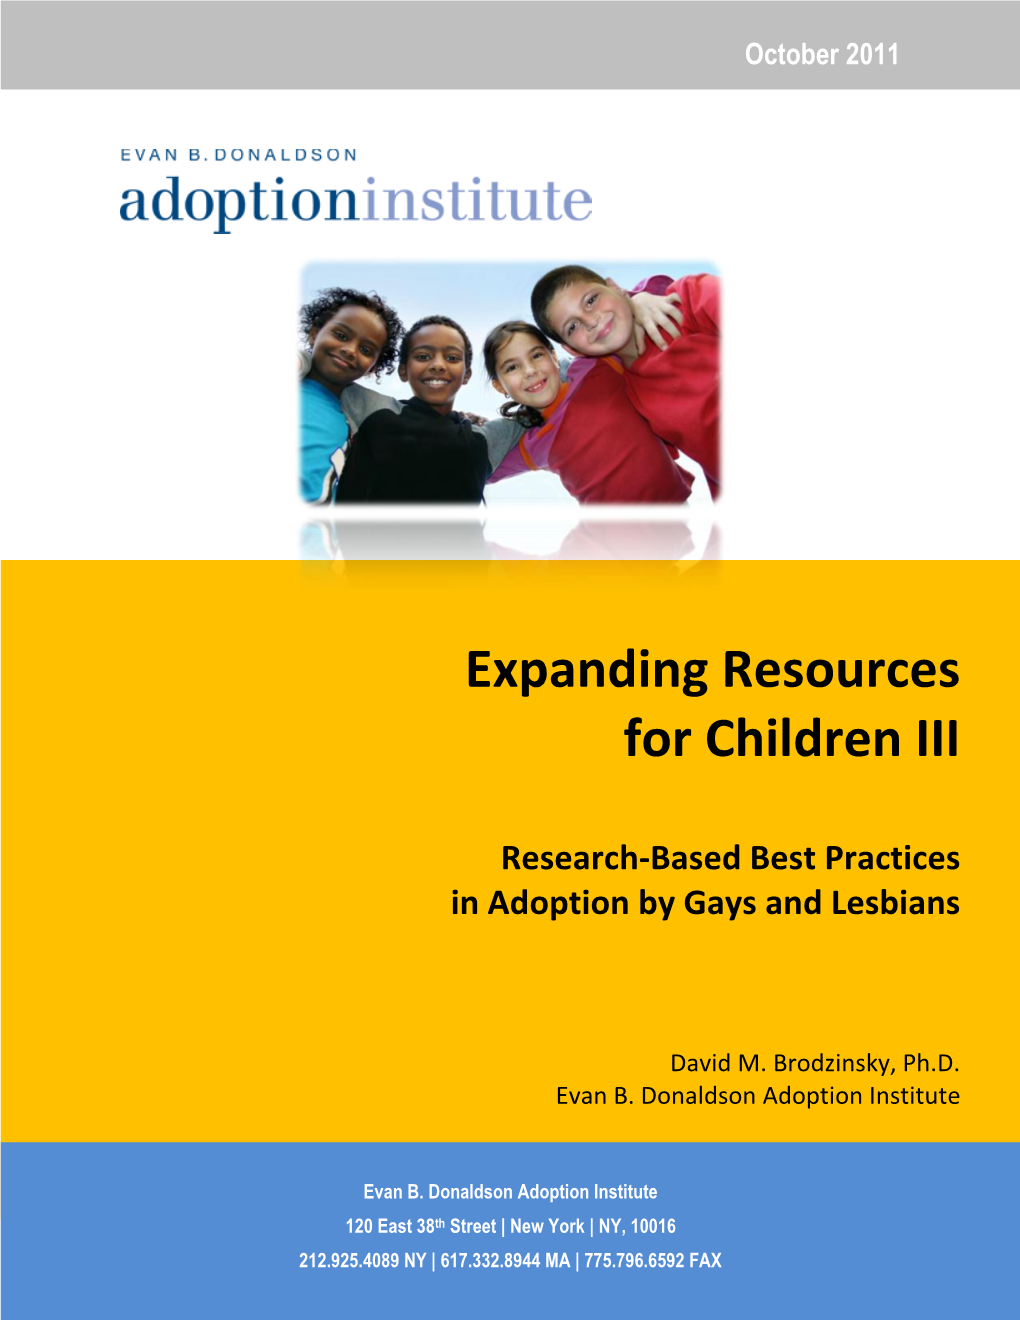 Adoption by Lesbians and Gay Men: a New Dimension in Family Diversity (2011A)